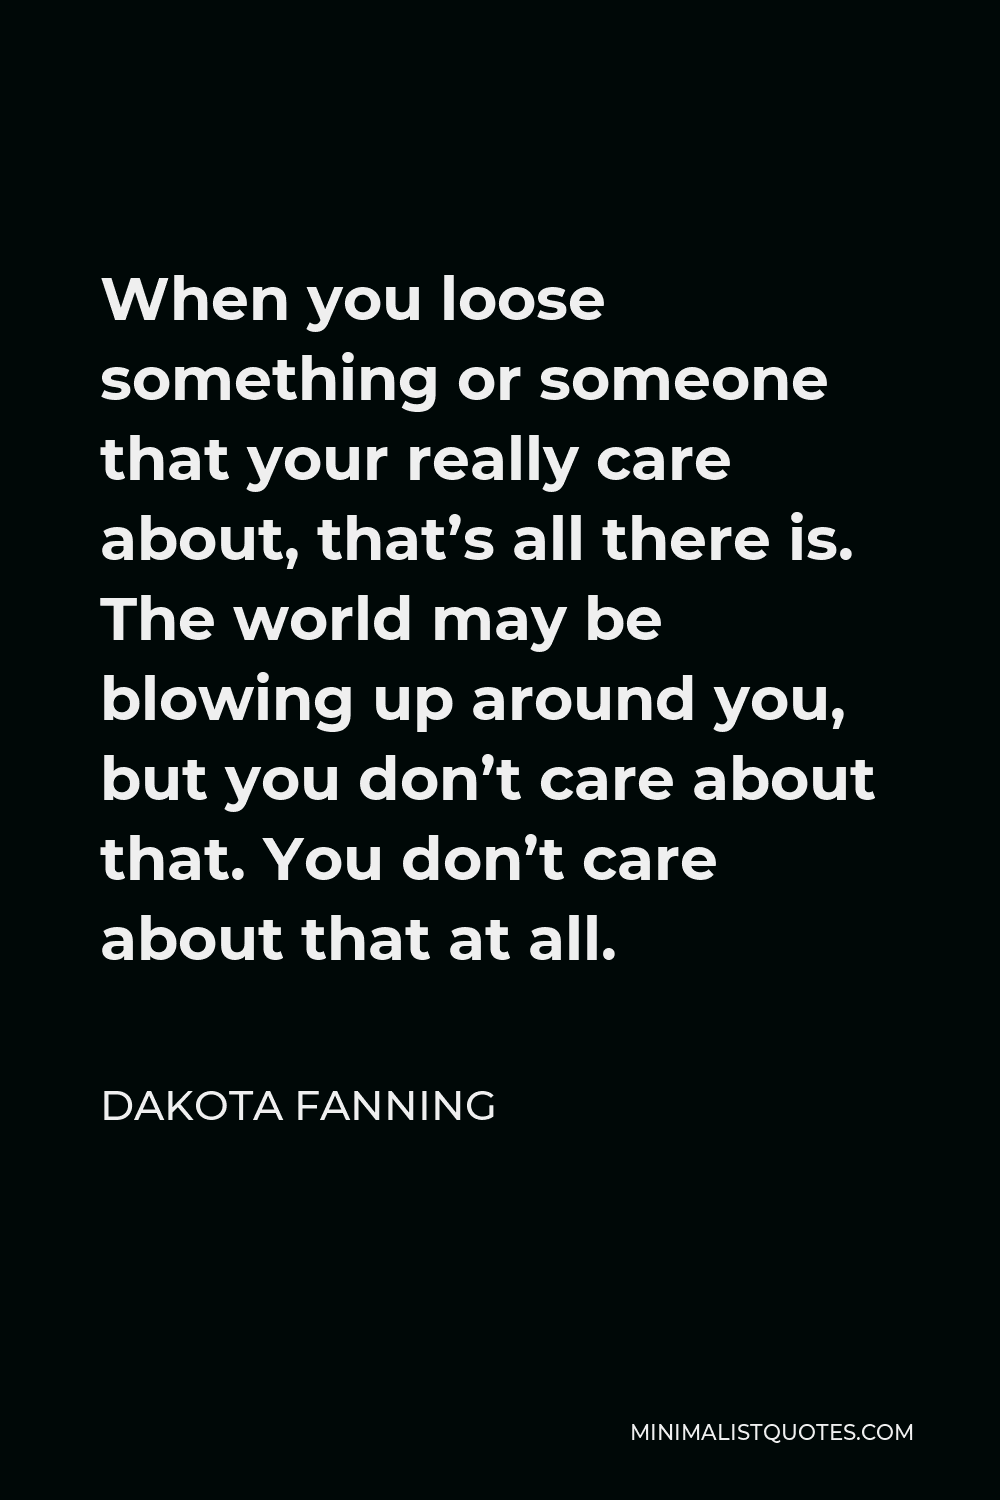 Dakota Fanning Quote - When you loose something or someone that your really care about, that’s all there is. The world may be blowing up around you, but you don’t care about that. You don’t care about that at all.